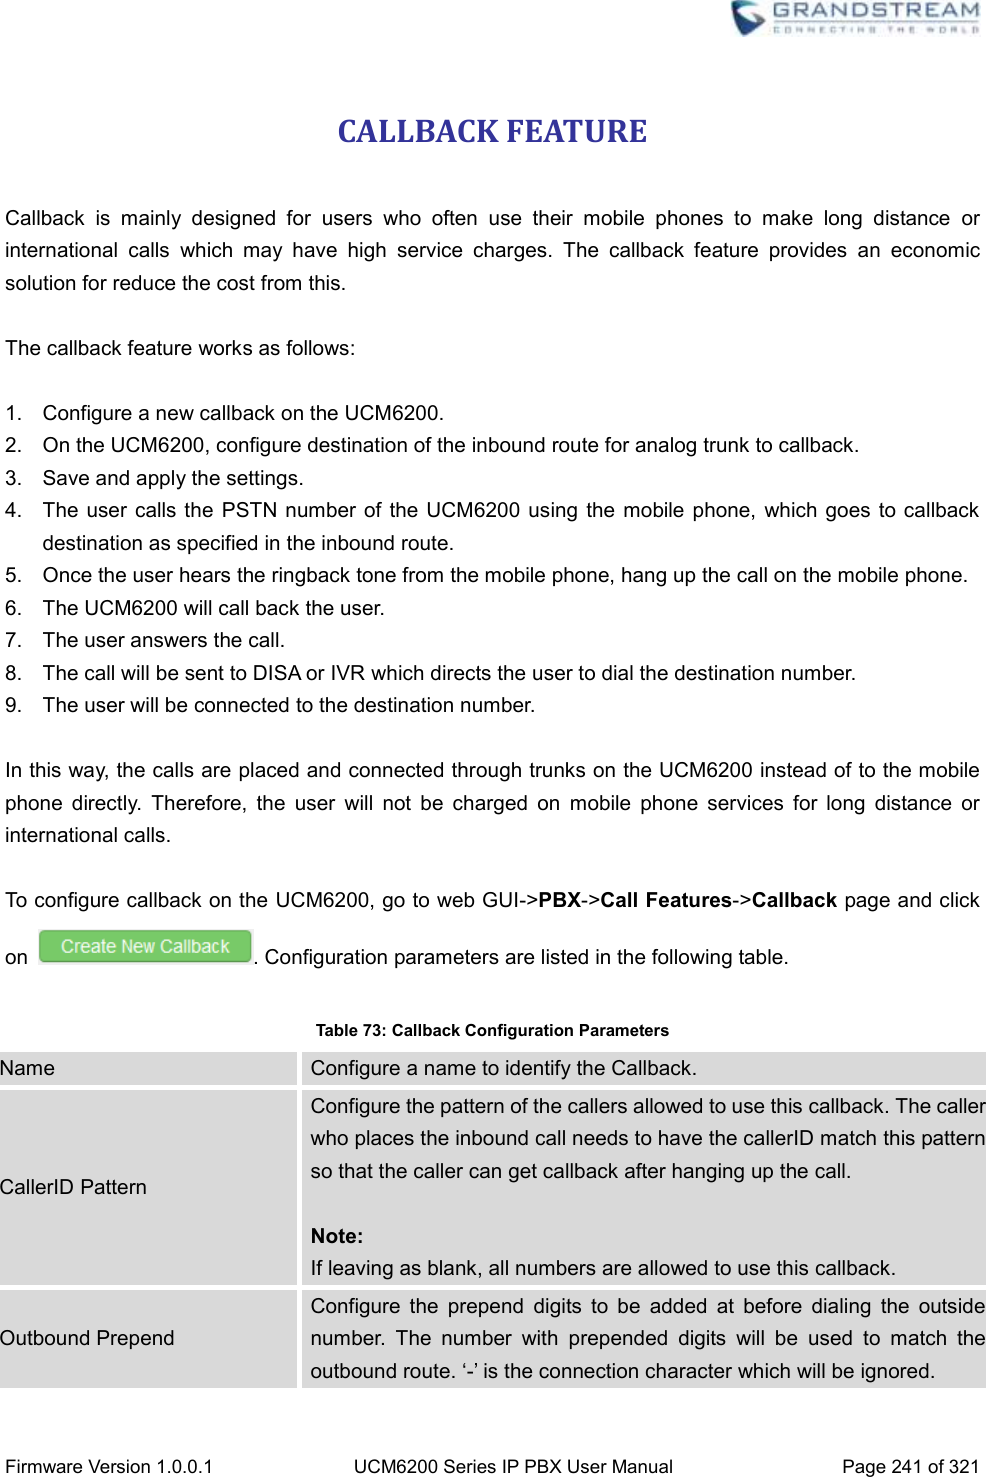  Firmware Version 1.0.0.1 UCM6200 Series IP PBX User Manual Page 241 of 321    CALLBACK FEATURE  Callback  is  mainly  designed  for  users  who  often  use  their  mobile  phones  to  make  long  distance  or international  calls  which  may  have  high  service  charges.  The  callback  feature  provides  an  economic solution for reduce the cost from this.  The callback feature works as follows:  1. Configure a new callback on the UCM6200. 2.  On the UCM6200, configure destination of the inbound route for analog trunk to callback. 3.  Save and apply the settings. 4.  The user calls the PSTN number of  the UCM6200  using the mobile phone,  which goes  to callback destination as specified in the inbound route. 5.  Once the user hears the ringback tone from the mobile phone, hang up the call on the mobile phone. 6.  The UCM6200 will call back the user. 7.  The user answers the call. 8.  The call will be sent to DISA or IVR which directs the user to dial the destination number. 9.  The user will be connected to the destination number.  In this way, the calls are placed and connected through trunks on the UCM6200 instead of to the mobile phone  directly.  Therefore,  the  user  will  not  be  charged  on  mobile  phone  services  for  long  distance  or international calls.  To configure callback on the UCM6200, go to web GUI-&gt;PBX-&gt;Call Features-&gt;Callback page and click on  . Configuration parameters are listed in the following table.  Table 73: Callback Configuration Parameters Name Configure a name to identify the Callback. CallerID Pattern Configure the pattern of the callers allowed to use this callback. The caller who places the inbound call needs to have the callerID match this pattern so that the caller can get callback after hanging up the call.  Note: If leaving as blank, all numbers are allowed to use this callback. Outbound Prepend Configure  the  prepend  digits  to  be  added  at  before  dialing  the  outside number.  The  number  with  prepended  digits  will  be  used  to  match  the outbound route. ‘-’ is the connection character which will be ignored. 